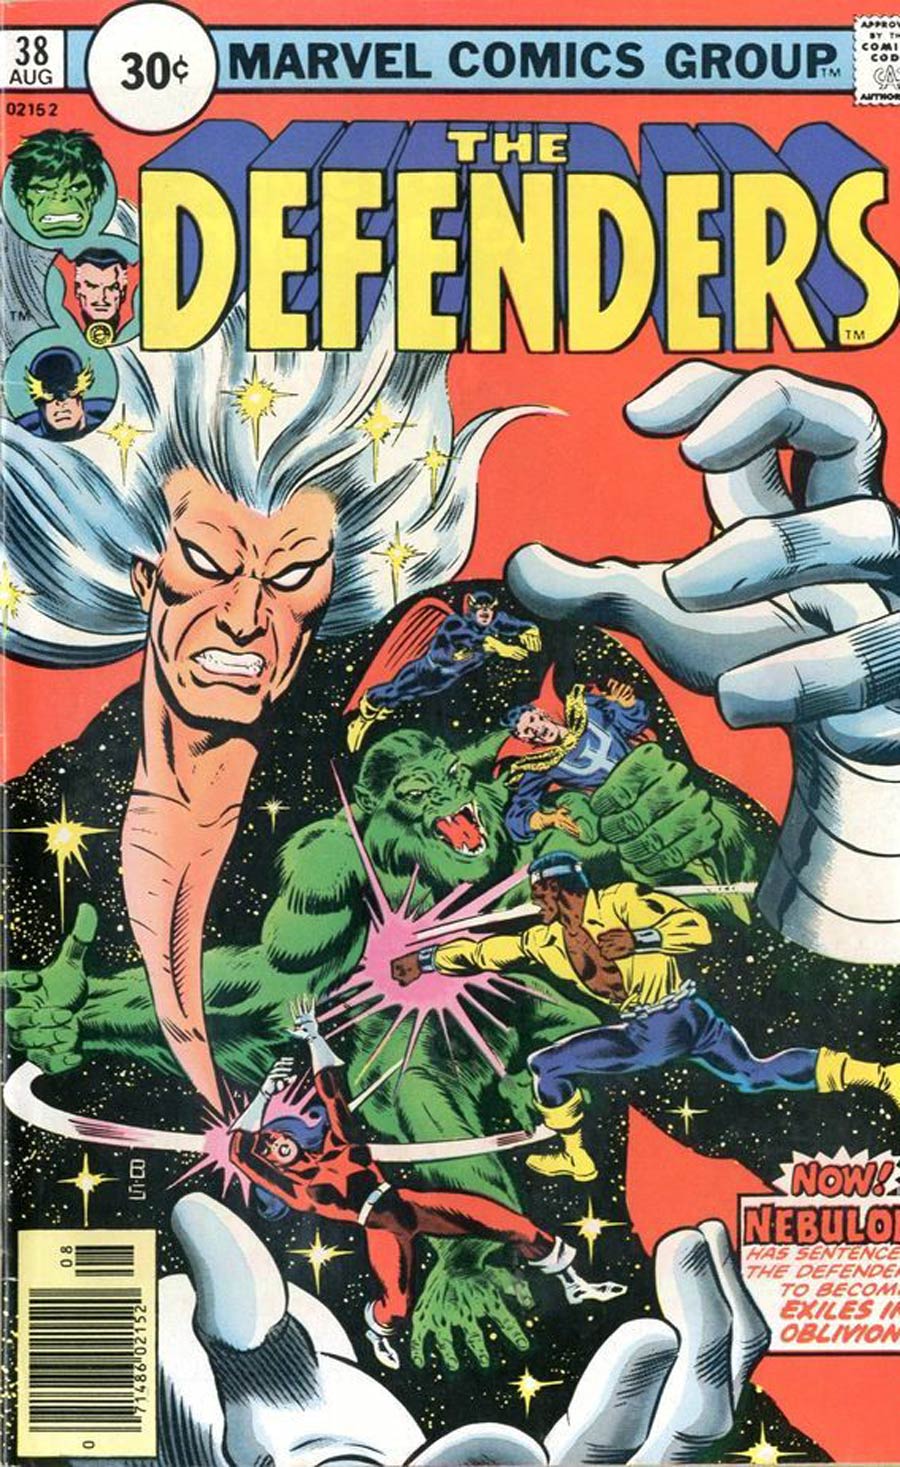 Defenders #38 Cover B 30-Cent Variant Edition